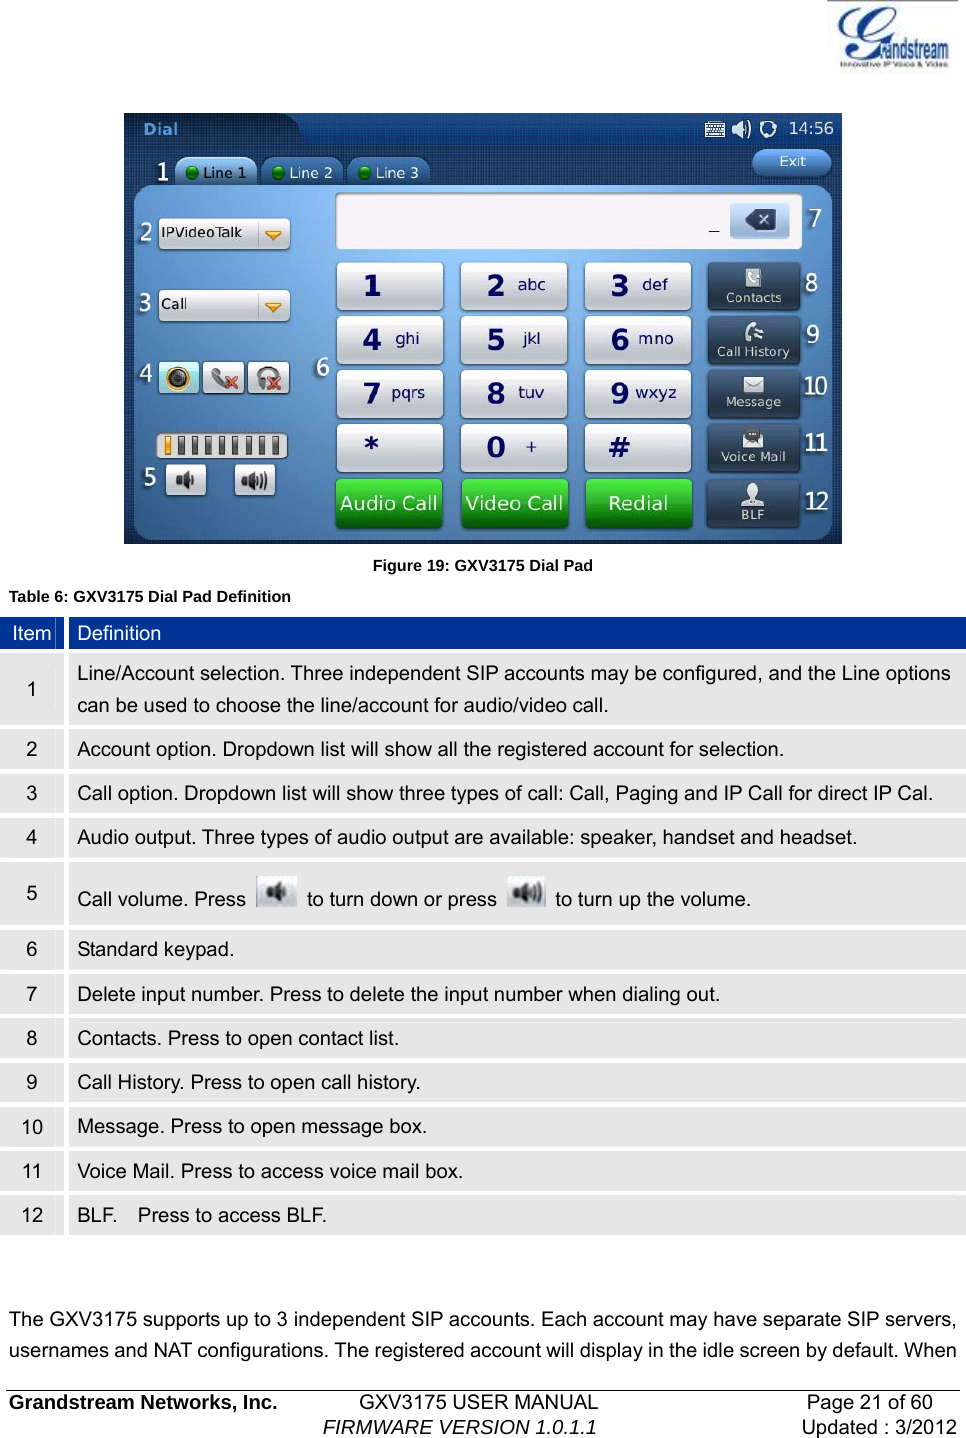   Grandstream Networks, Inc.        GXV3175 USER MANUAL                     Page 21 of 60                                FIRMWARE VERSION 1.0.1.1 Updated : 3/2012    Figure 19: GXV3175 Dial Pad Table 6: GXV3175 Dial Pad Definition Item  Definition 1  Line/Account selection. Three independent SIP accounts may be configured, and the Line options can be used to choose the line/account for audio/video call. 2  Account option. Dropdown list will show all the registered account for selection. 3  Call option. Dropdown list will show three types of call: Call, Paging and IP Call for direct IP Cal. 4  Audio output. Three types of audio output are available: speaker, handset and headset. 5  Call volume. Press    to turn down or press    to turn up the volume. 6  Standard keypad. 7  Delete input number. Press to delete the input number when dialing out. 8  Contacts. Press to open contact list. 9  Call History. Press to open call history. 10  Message. Press to open message box. 11  Voice Mail. Press to access voice mail box. 12  BLF.  Press to access BLF.   The GXV3175 supports up to 3 independent SIP accounts. Each account may have separate SIP servers, usernames and NAT configurations. The registered account will display in the idle screen by default. When 